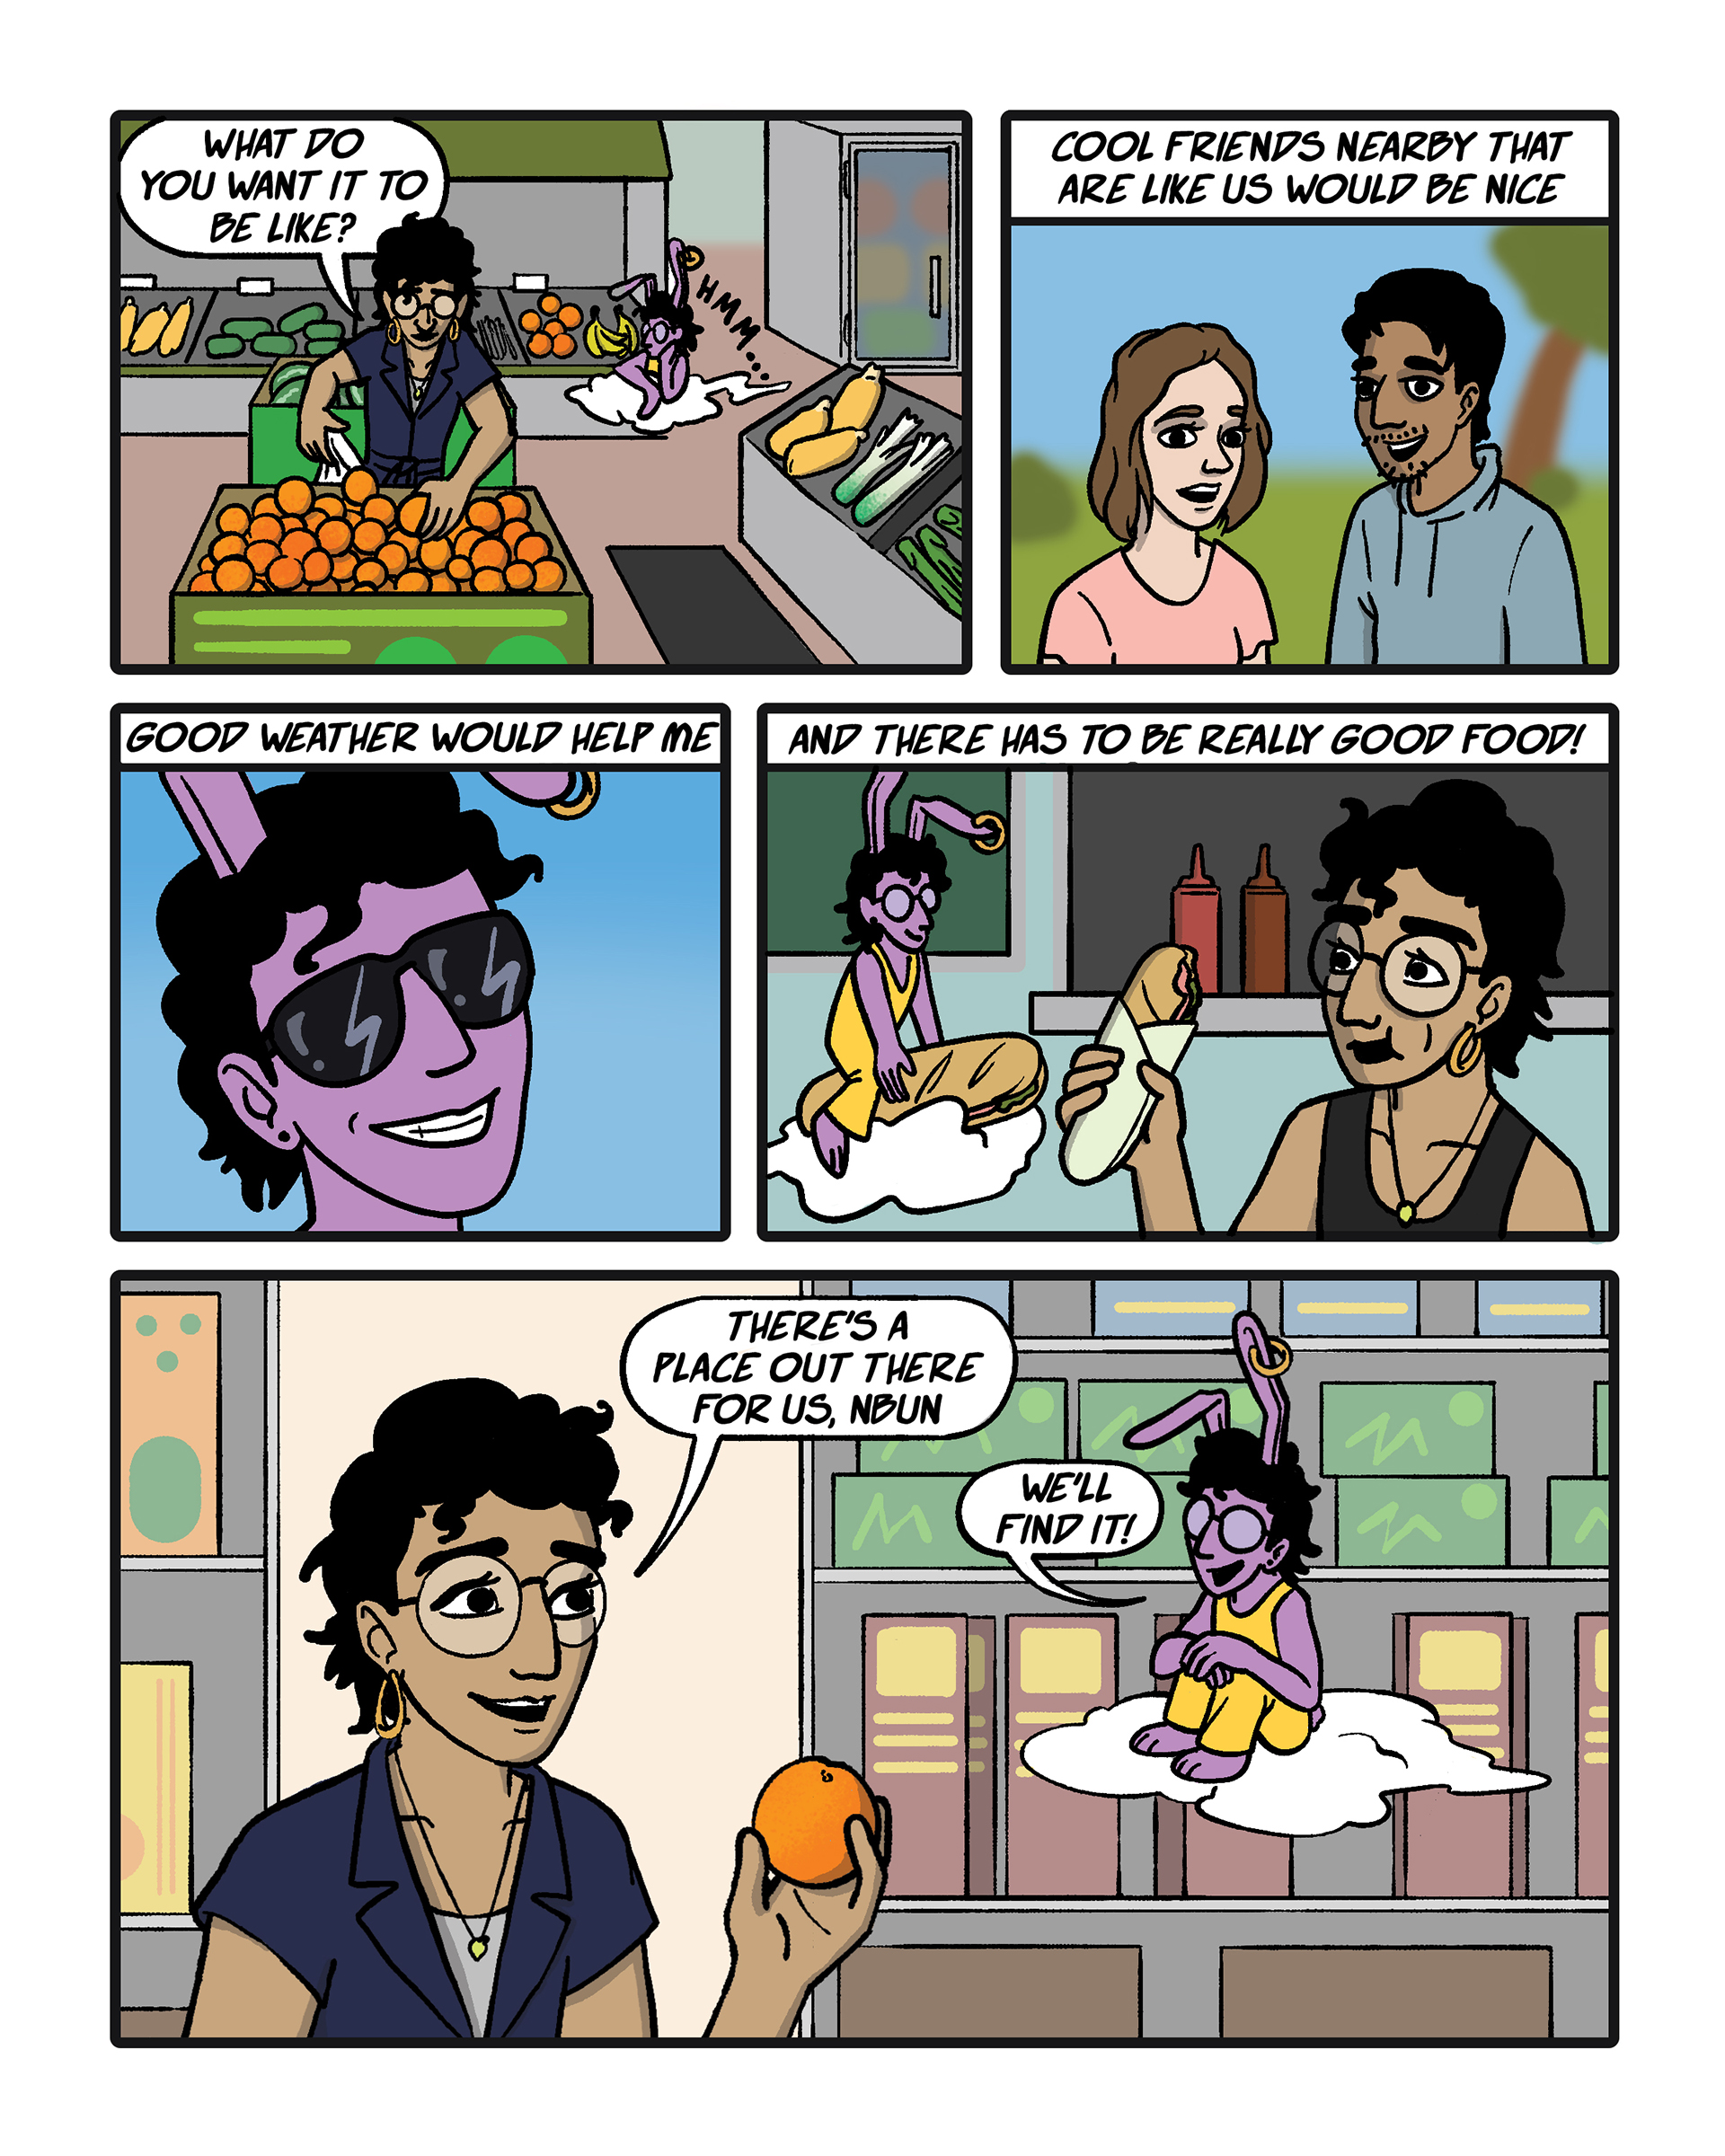 Page 3 from Ideal Home, digital comic by Noah Laroia-Nguyen.